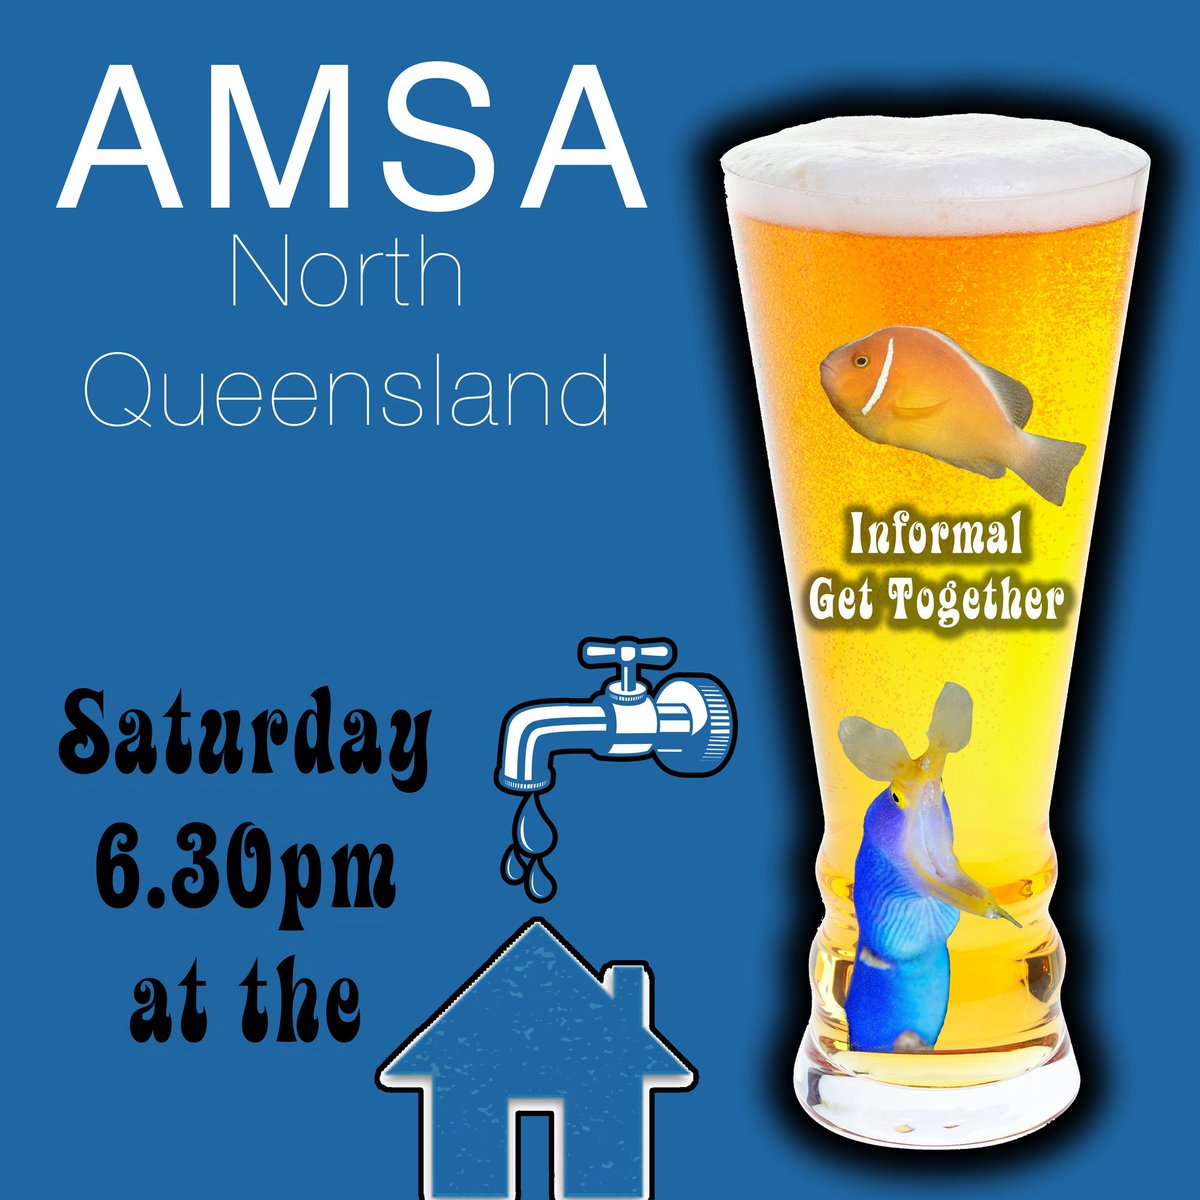 Dont forget about our about @AmsaNq #SocialNight this Saturday at the #TapHouse #Townsville! All members (and soon to be members!) welcome! 6.30pm!